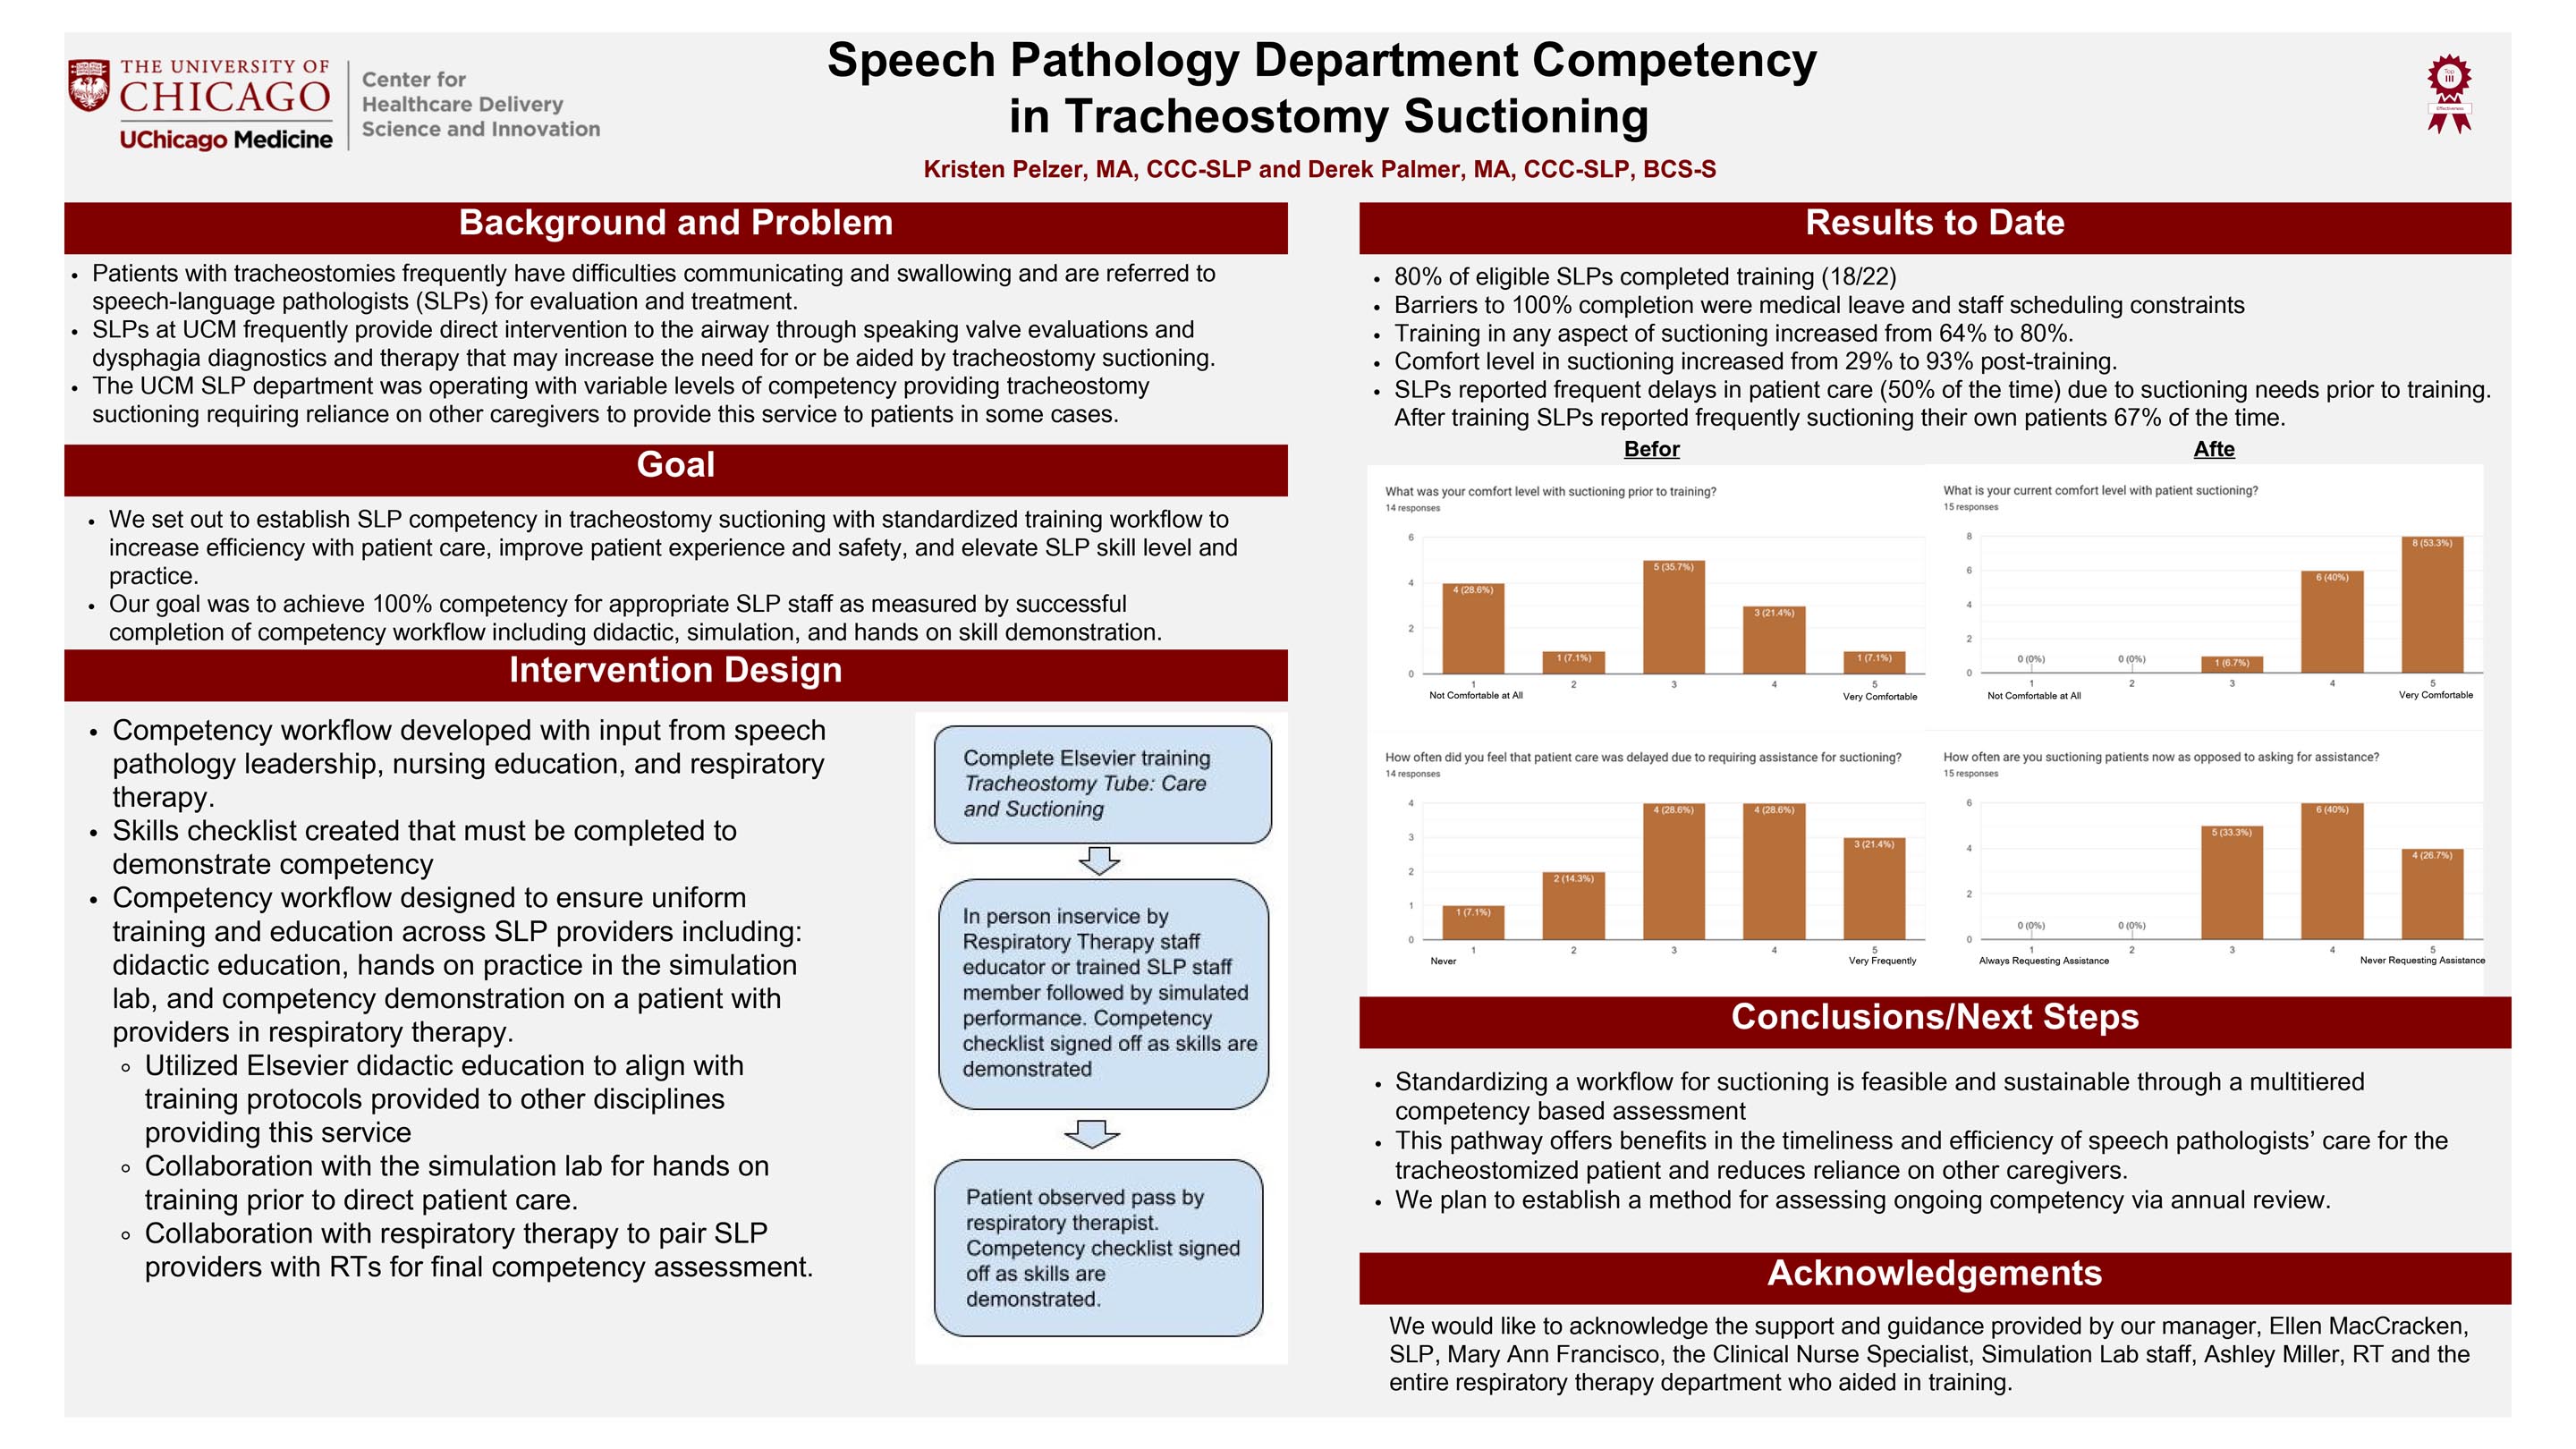 PALMER_Speech Pathology Department Competency in Tracheostomy Suctioning